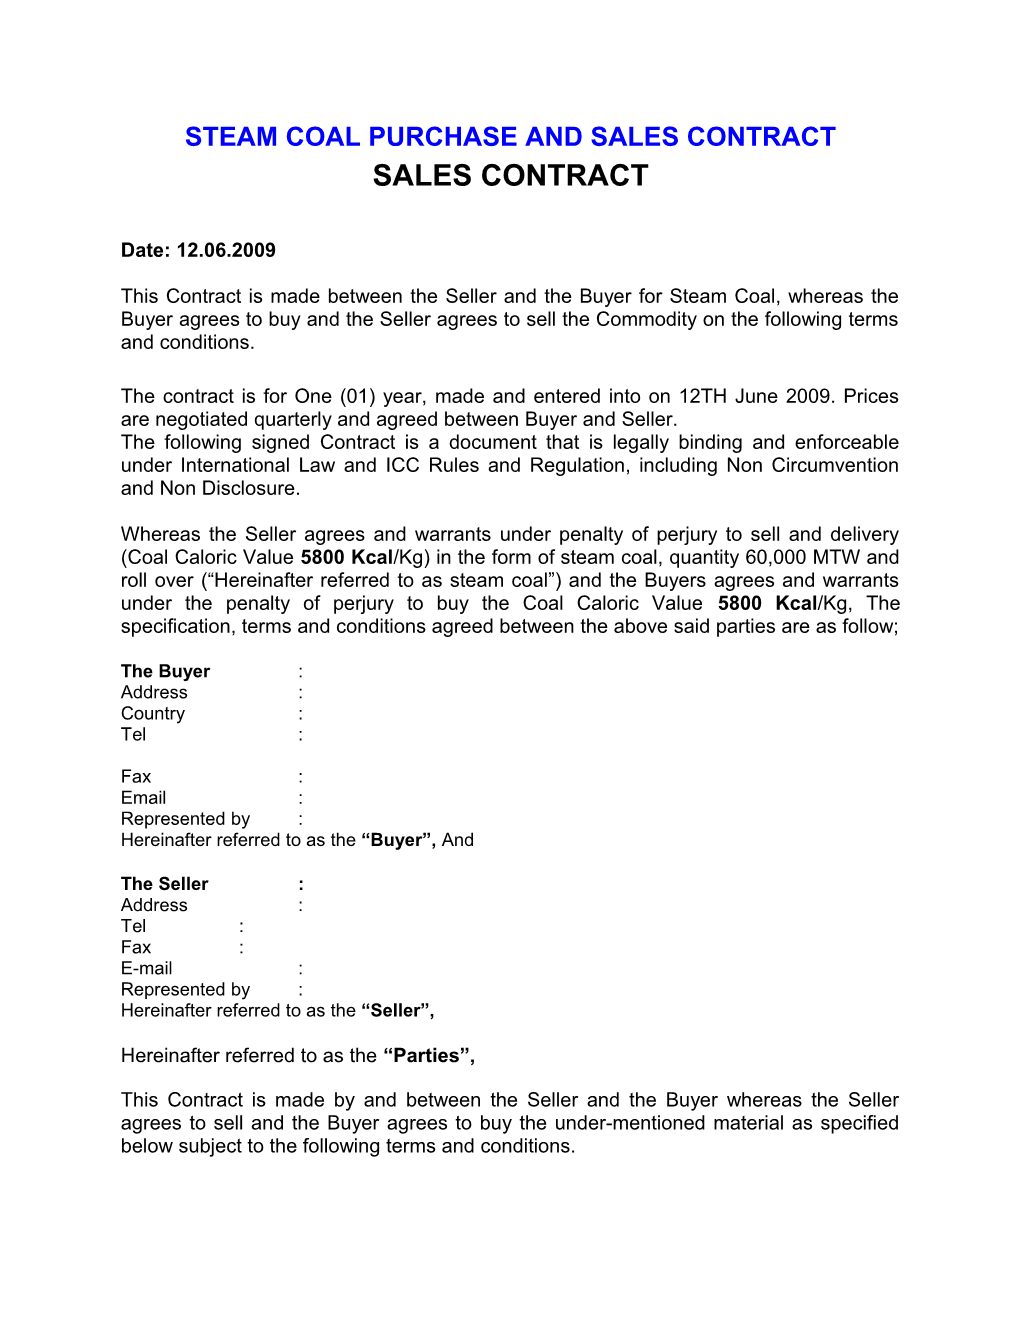 Steam Coal Purchase and Sales Contract